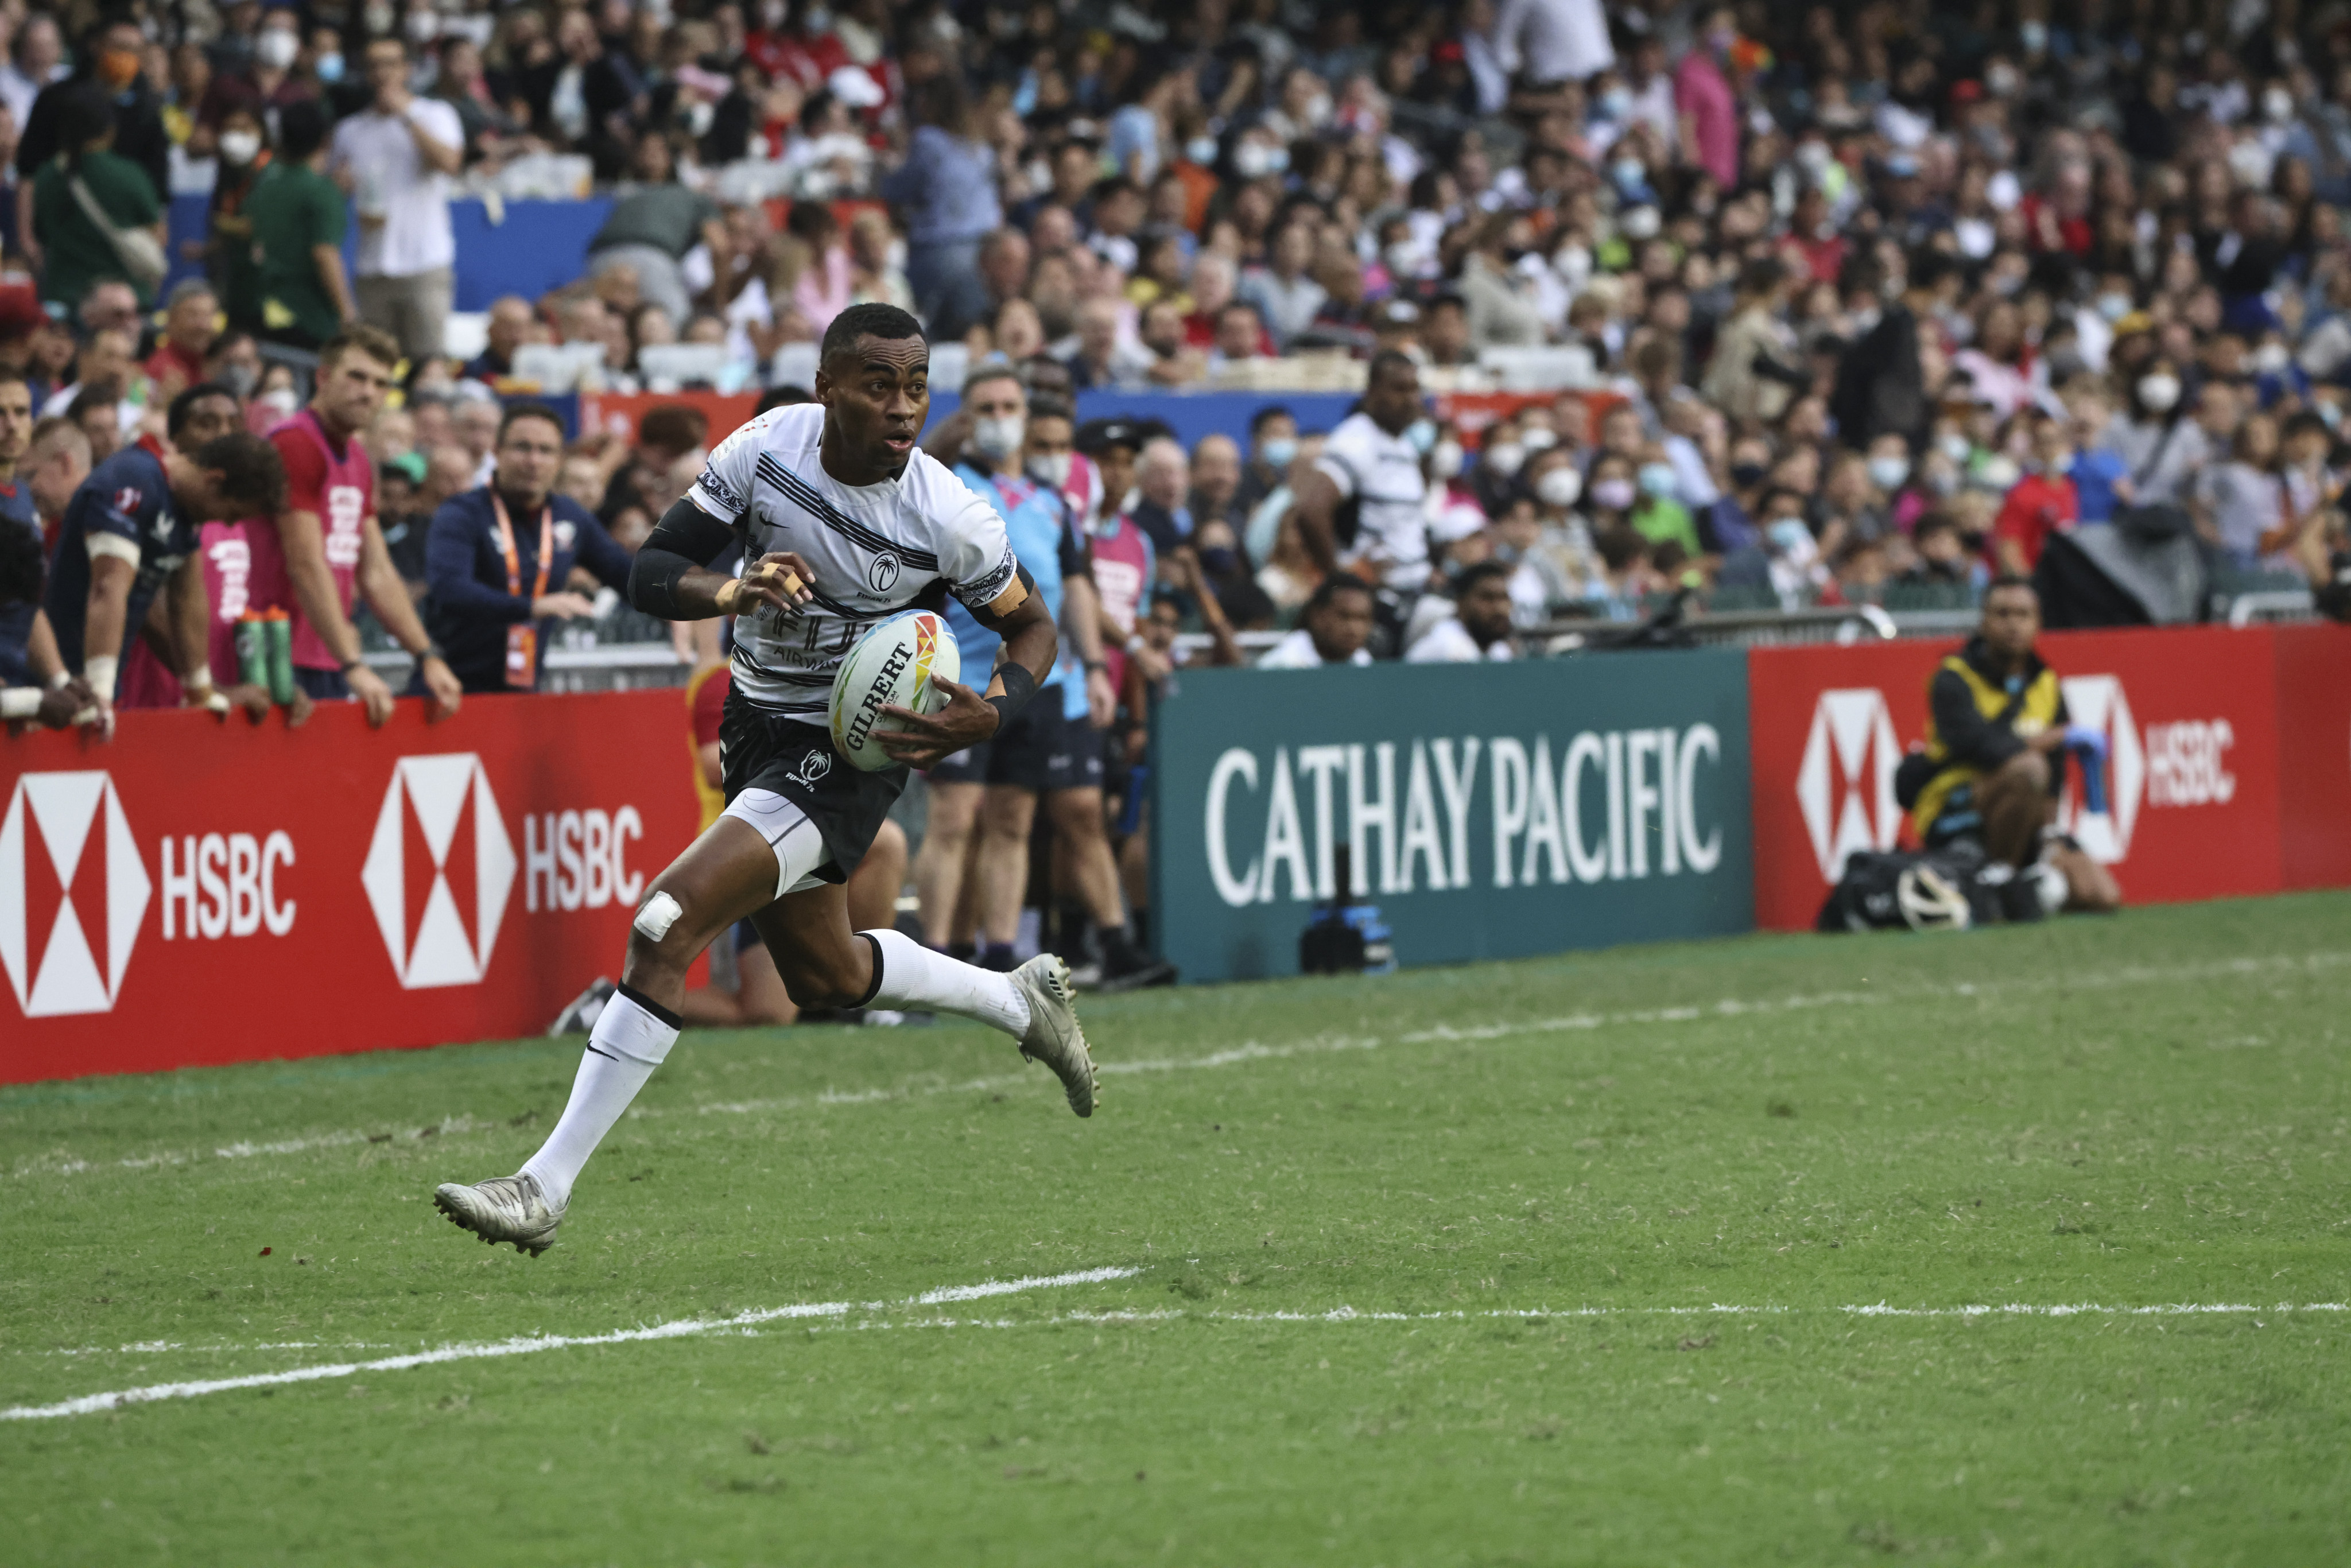 Fiji’s Vuiviawa Naduvalo races towards the try line against Team USA. Photo: K. Y. Cheng